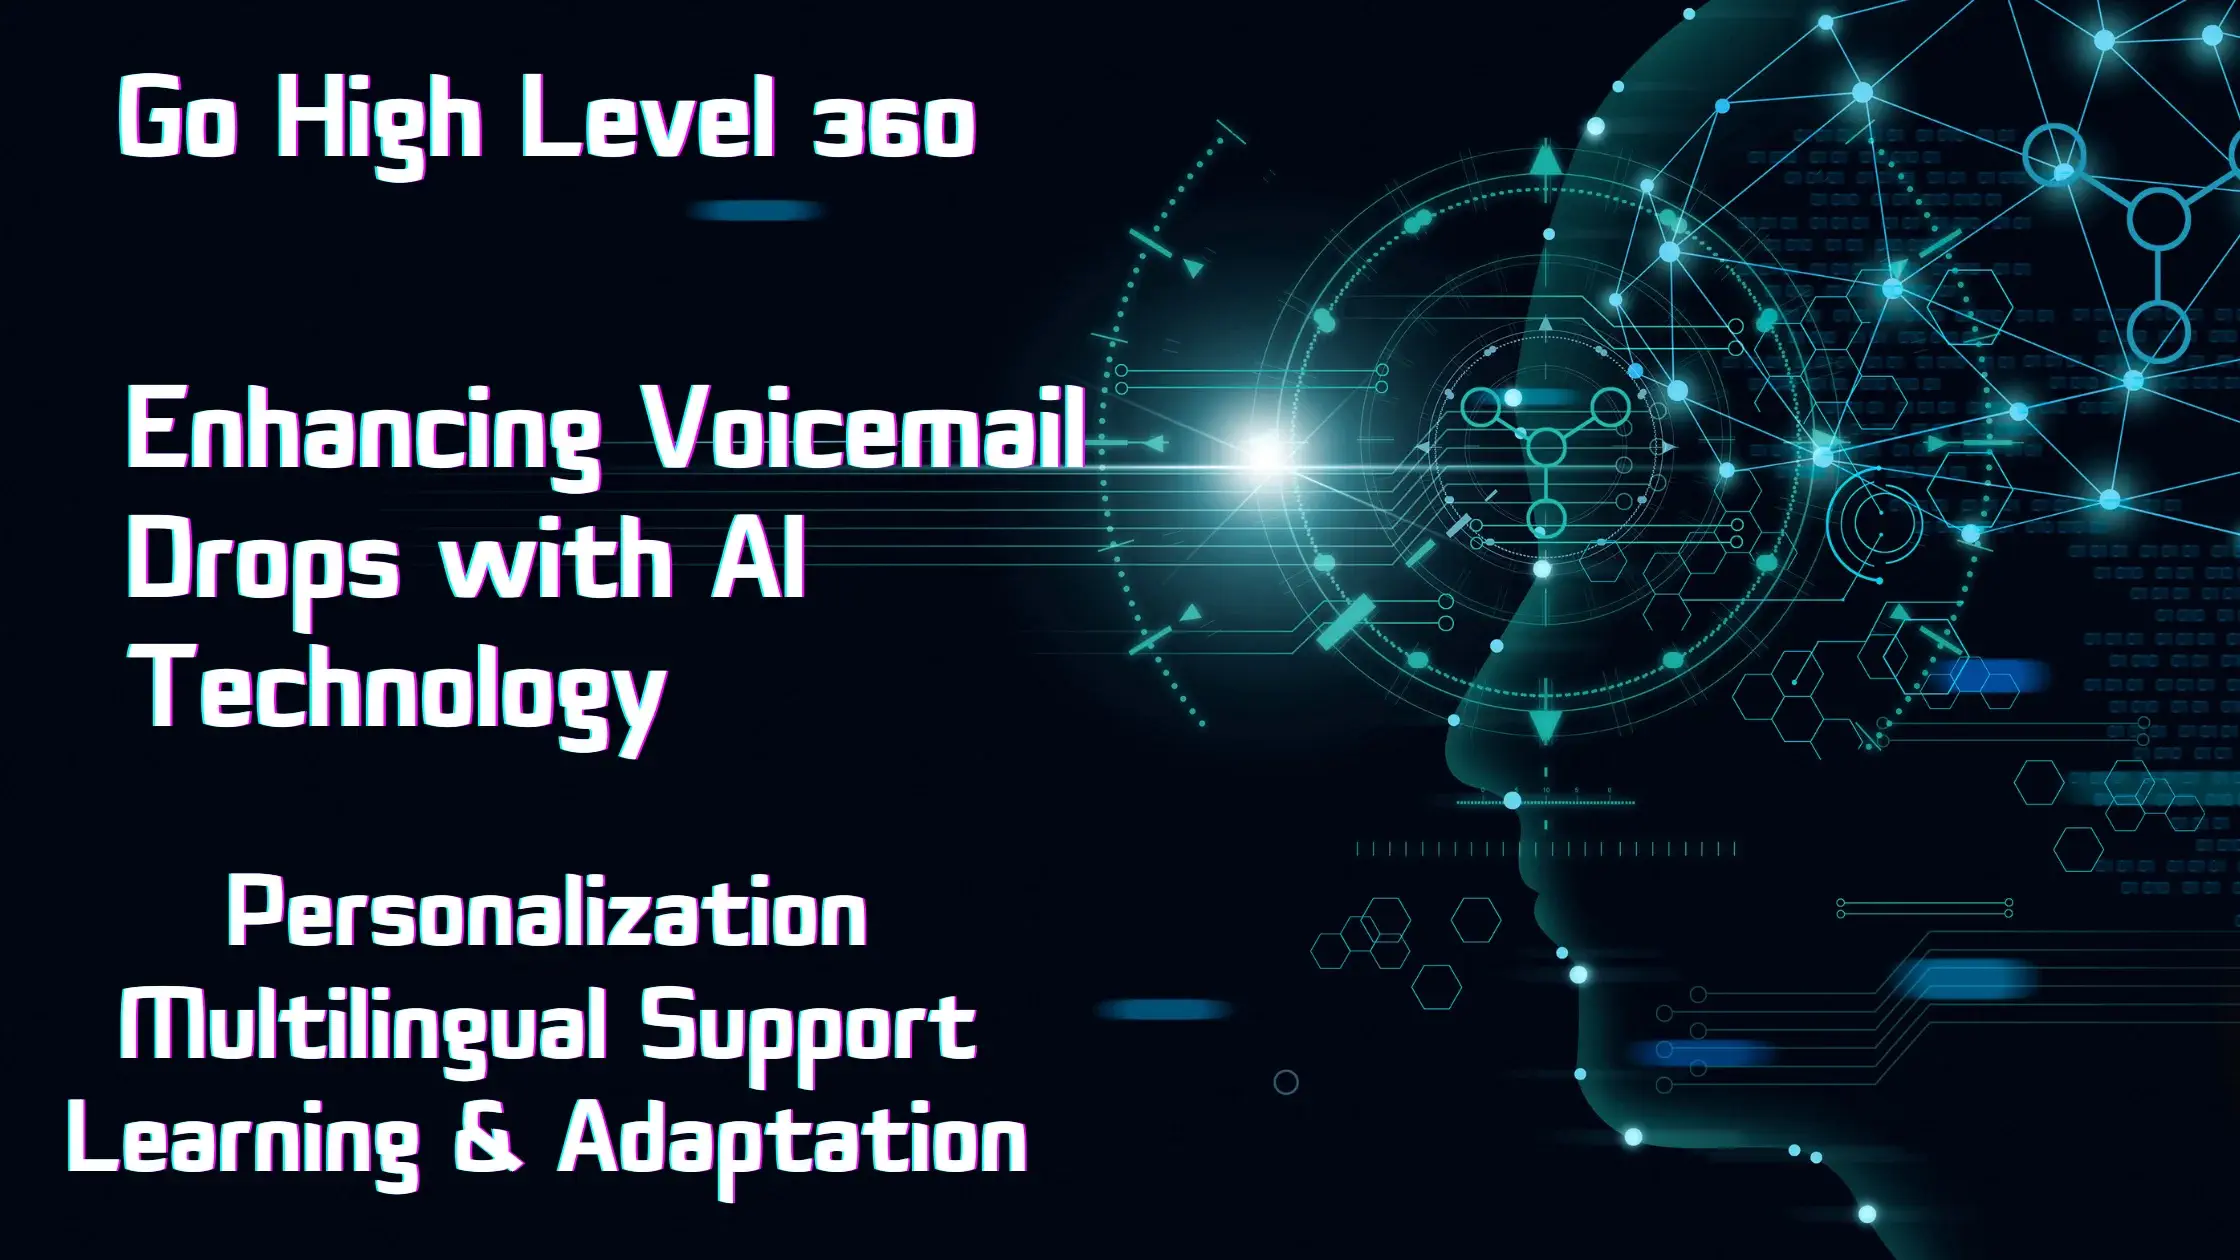 Infograph showing the 3 enhancements of AI with voicemail drops